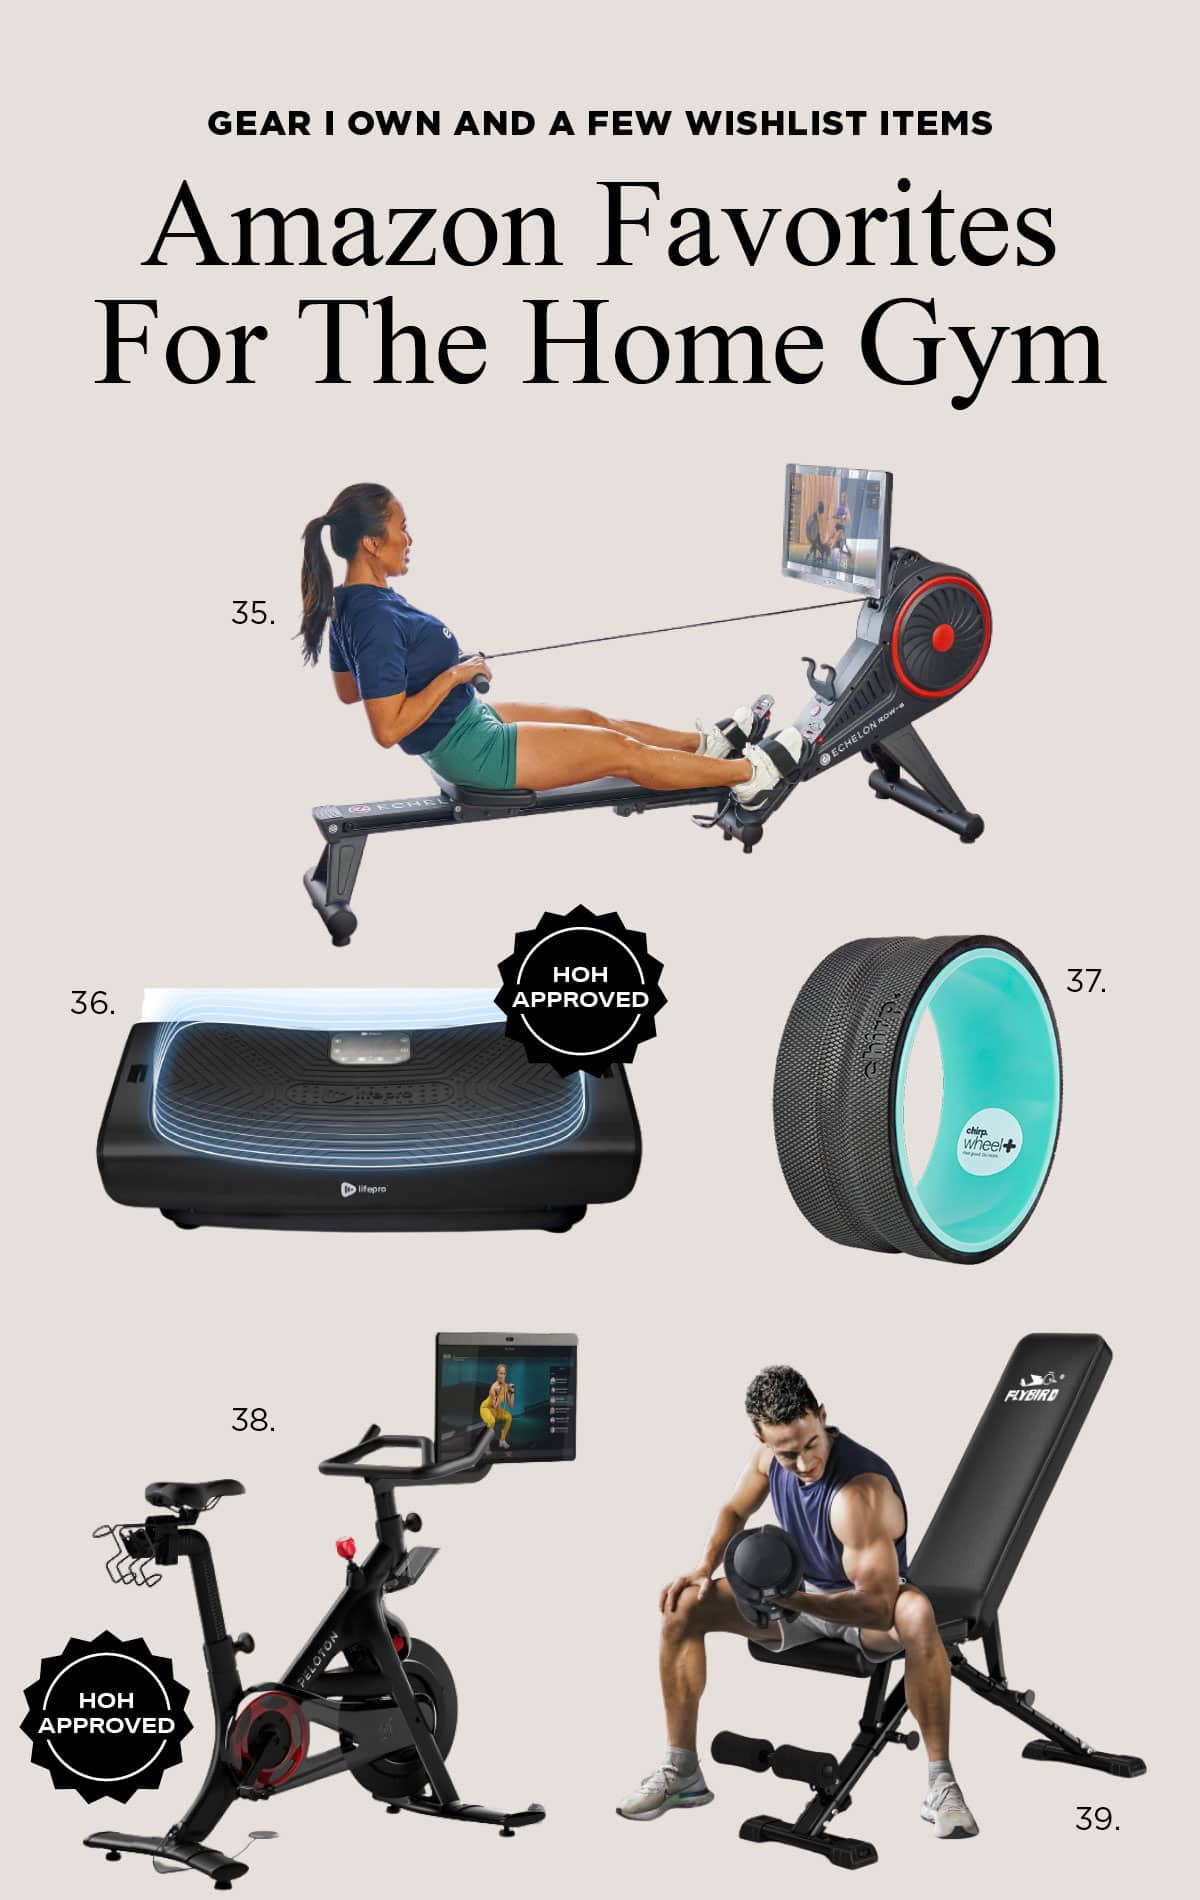 Best Home Gym and Workout Gear - Amazon Prime Big Deal Days - The Peloton bike is finally in the Amazon Prime Big Deal Days! Check out out all these home gym items and workout gear!